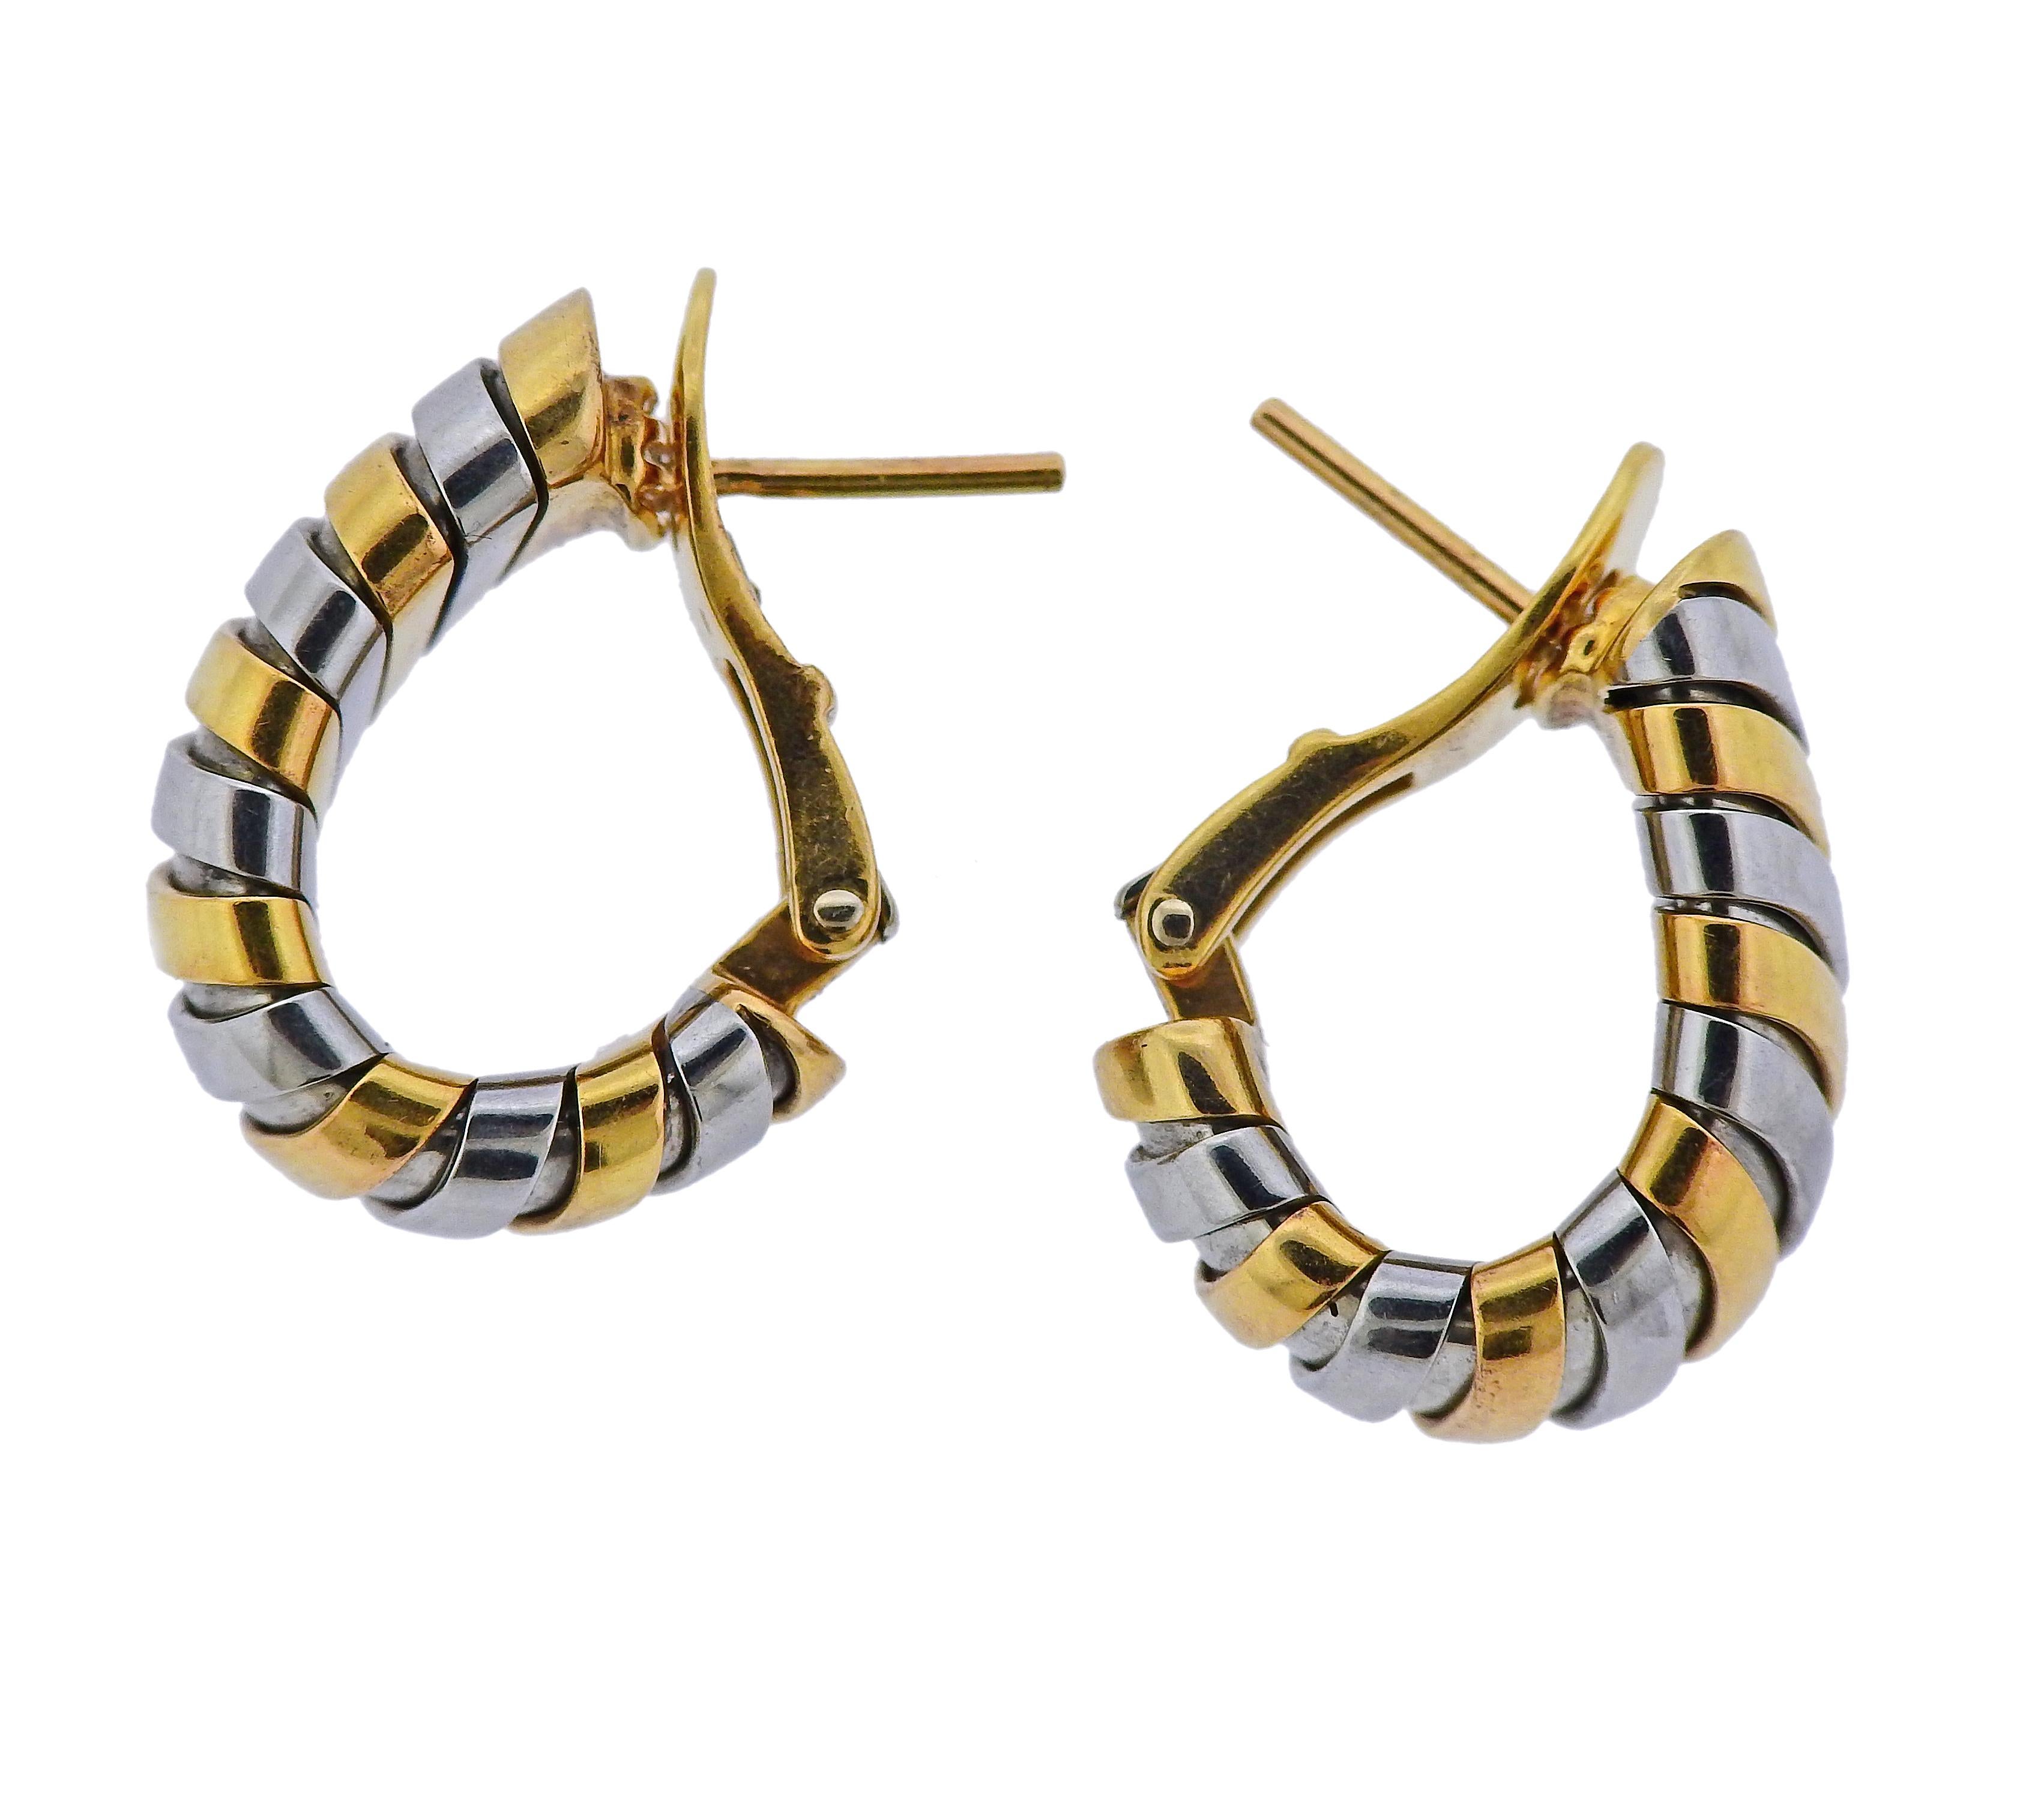 18k yellow gold and stainless steel Tubogas hoop earrings, crafted by Bvlgari. Earrings measure 21mm x 12mm. Marked: Bvlgari, 750, 1106MI, Made in Italy, Gold and Steel. Weight: 18.9 grams.